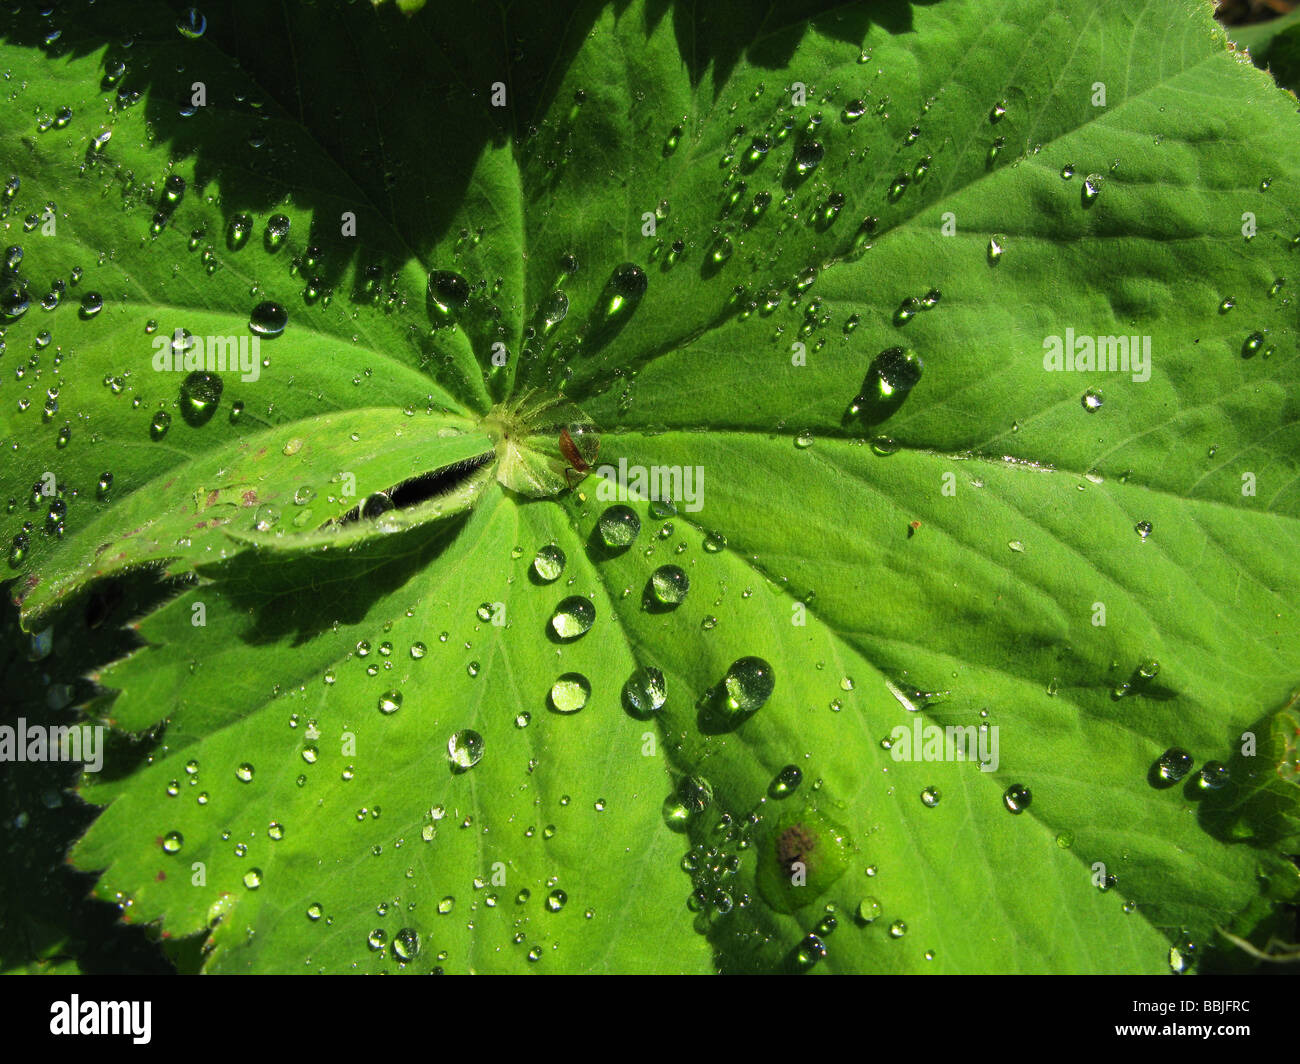 Water droplets on leaves of Alchemilla mollis plant, better known as Garden Lady's Mantle Stock Photo